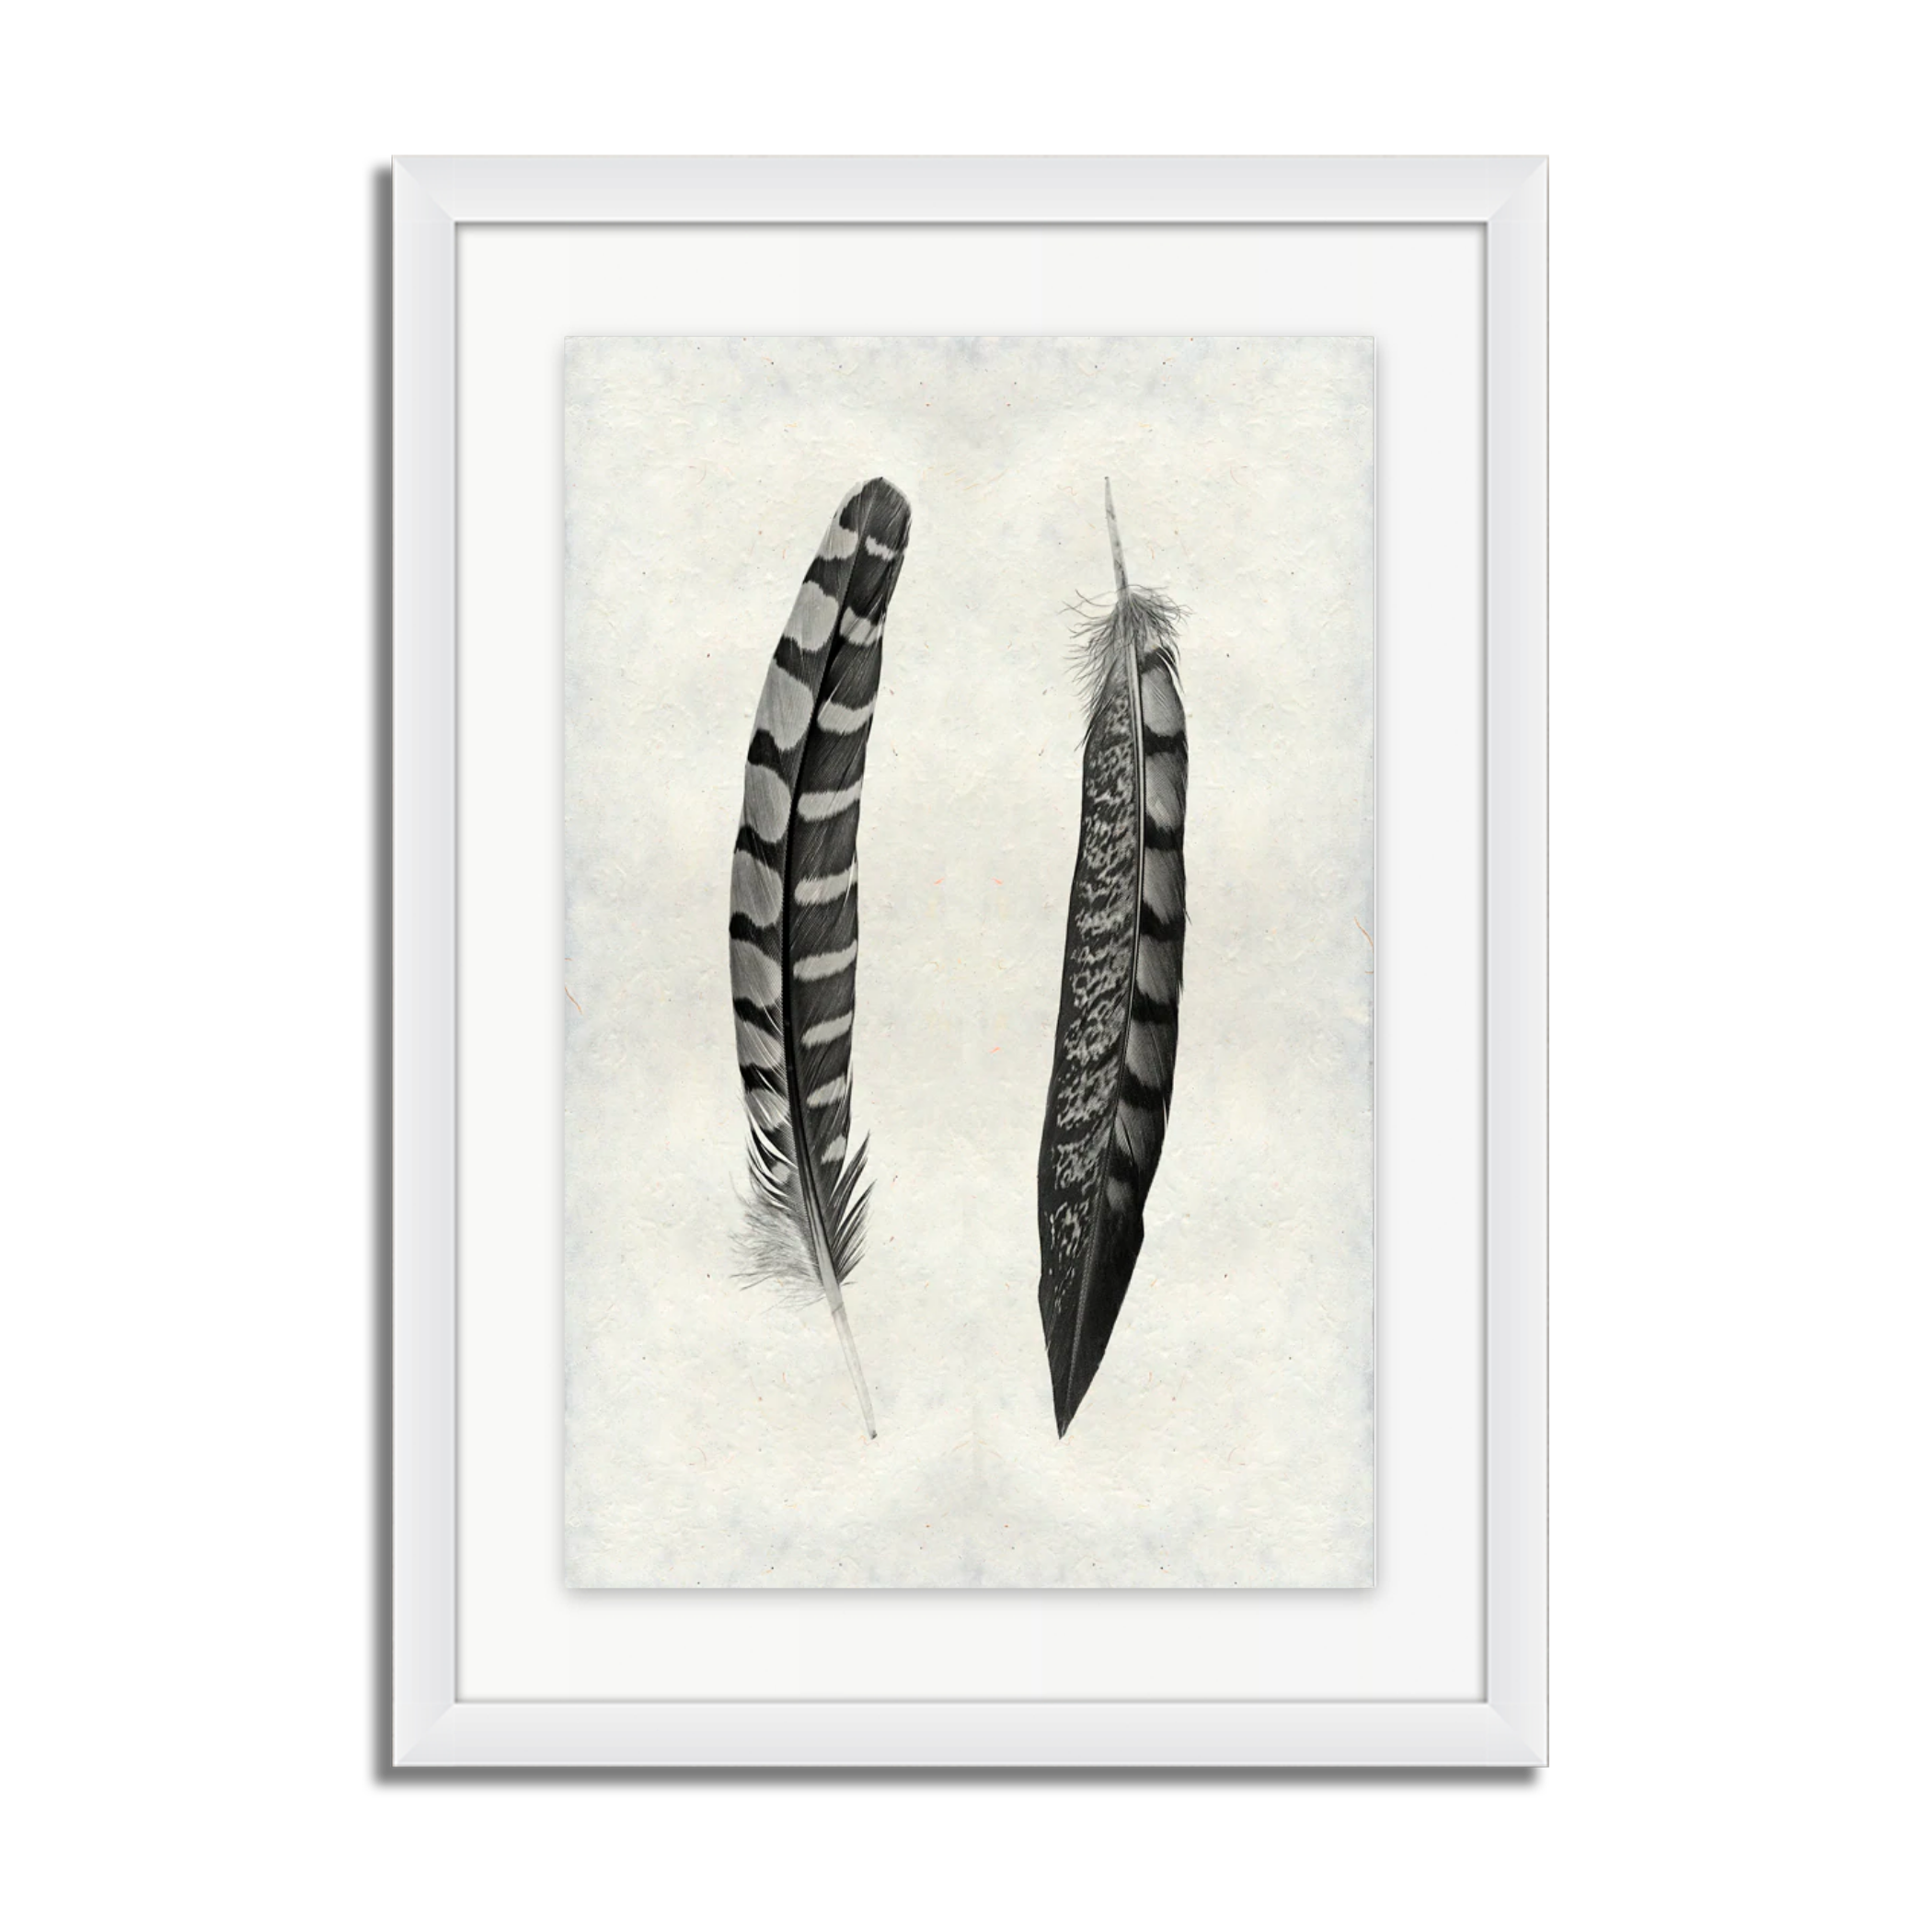 2 Curved Feathers (Partridge Wing & Pheasant Tail)